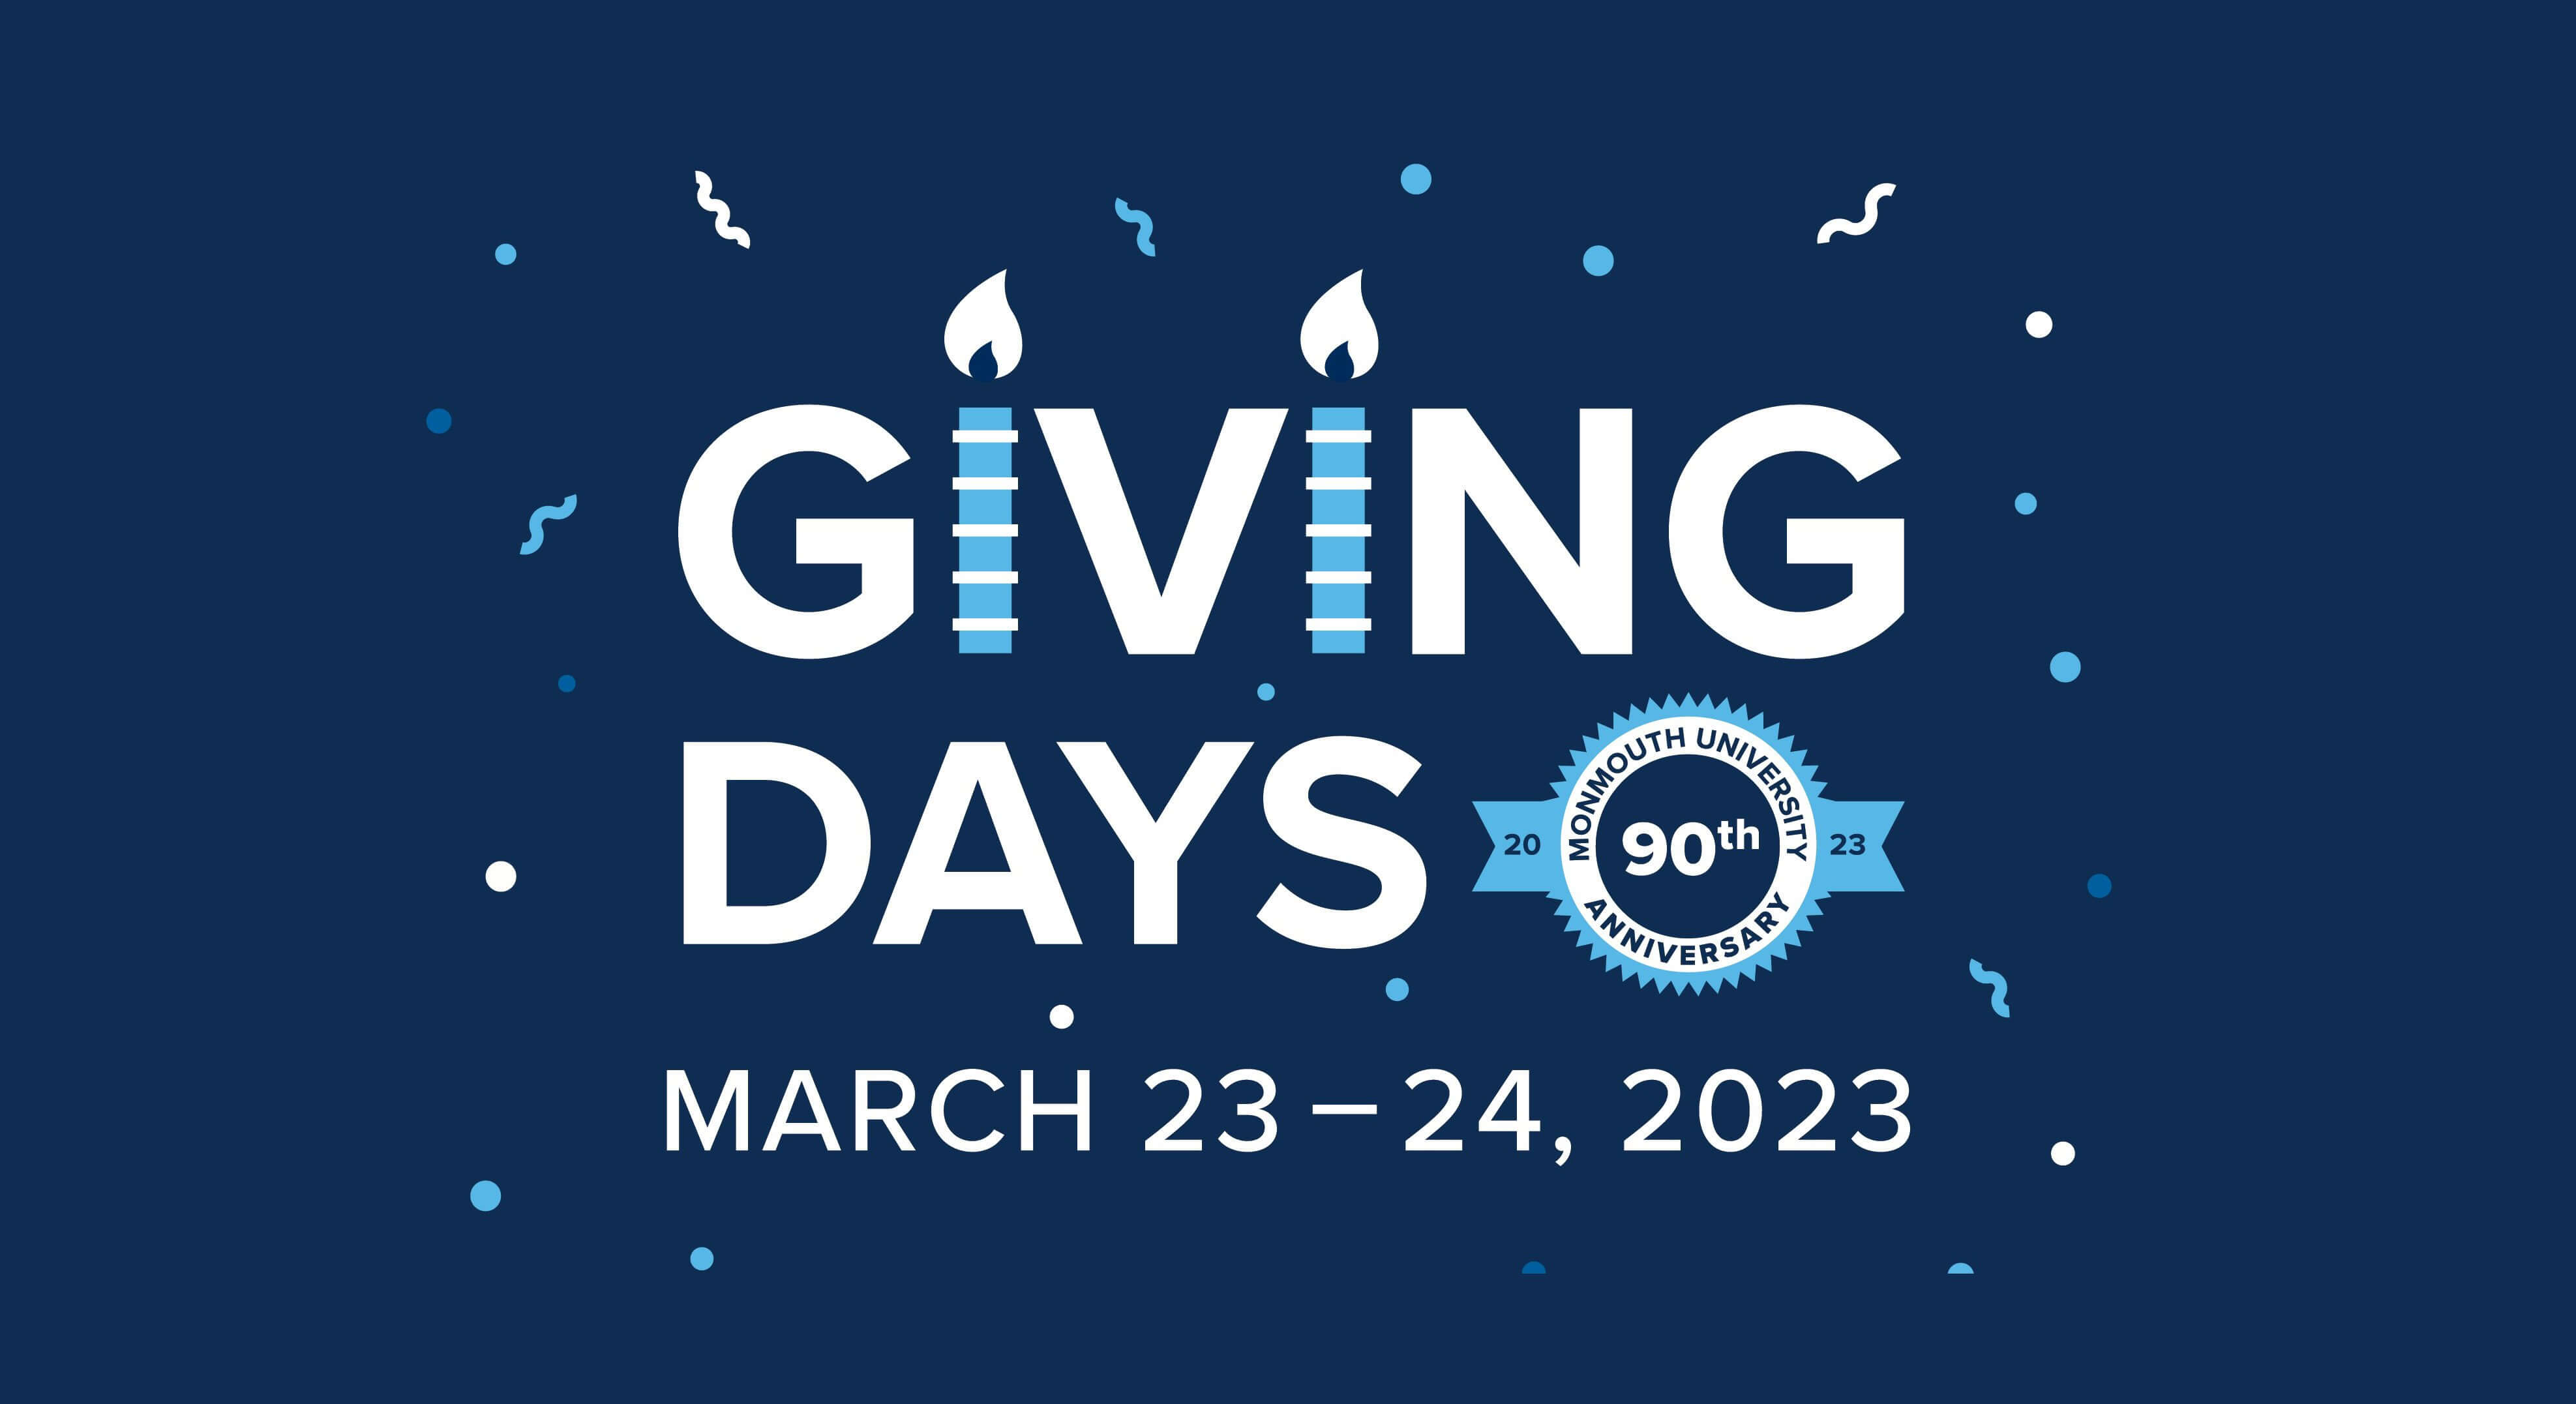 Giving Days 2023 are Here | News | Monmouth University